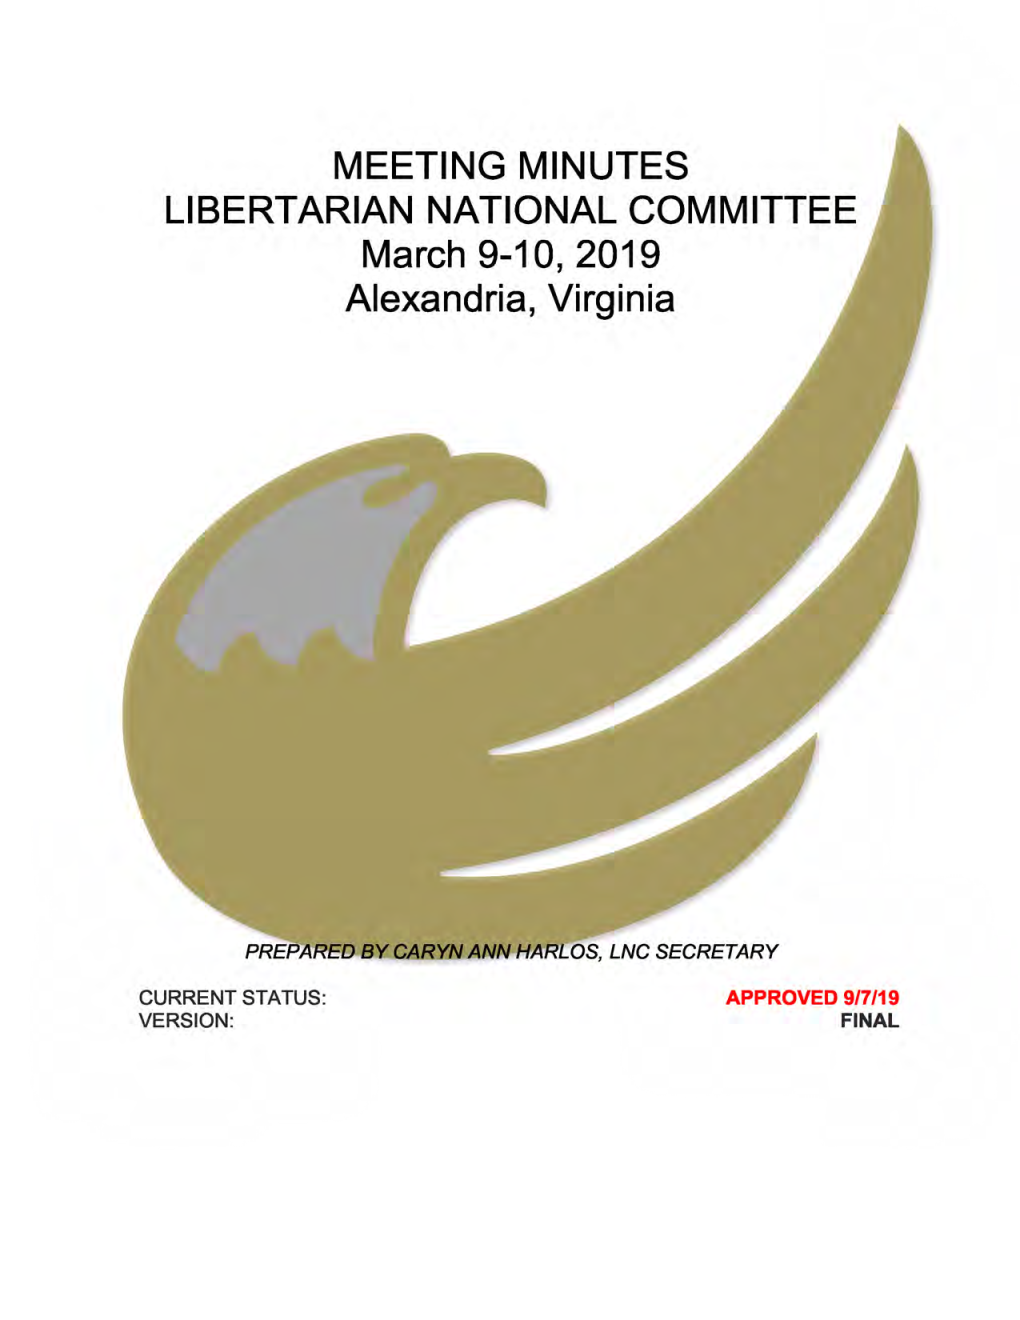 March 9-10, 2019, LNC Meeting Minutes